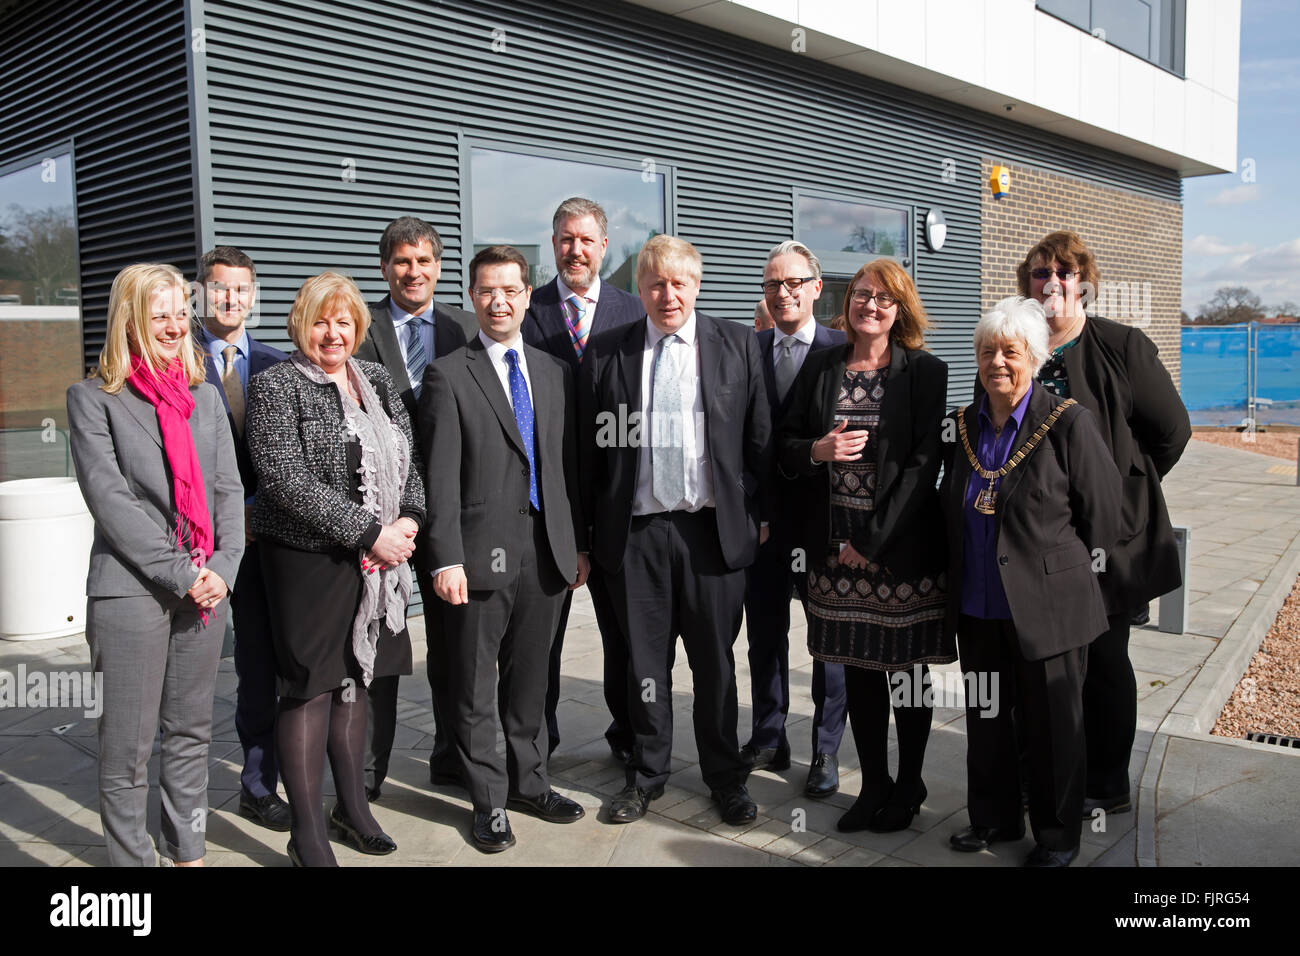 Sidcup, UK. 3rd March, 2016. The Mayor of London Boris Johnson formally opened the new sixth form building at Chislehurst and Sidcup Grammar School, which has been created by re-using one of the buildings from London's 2012 Olympic and Paralympic Game Credit: Keith Larby/Alamy Live News Stock Photo